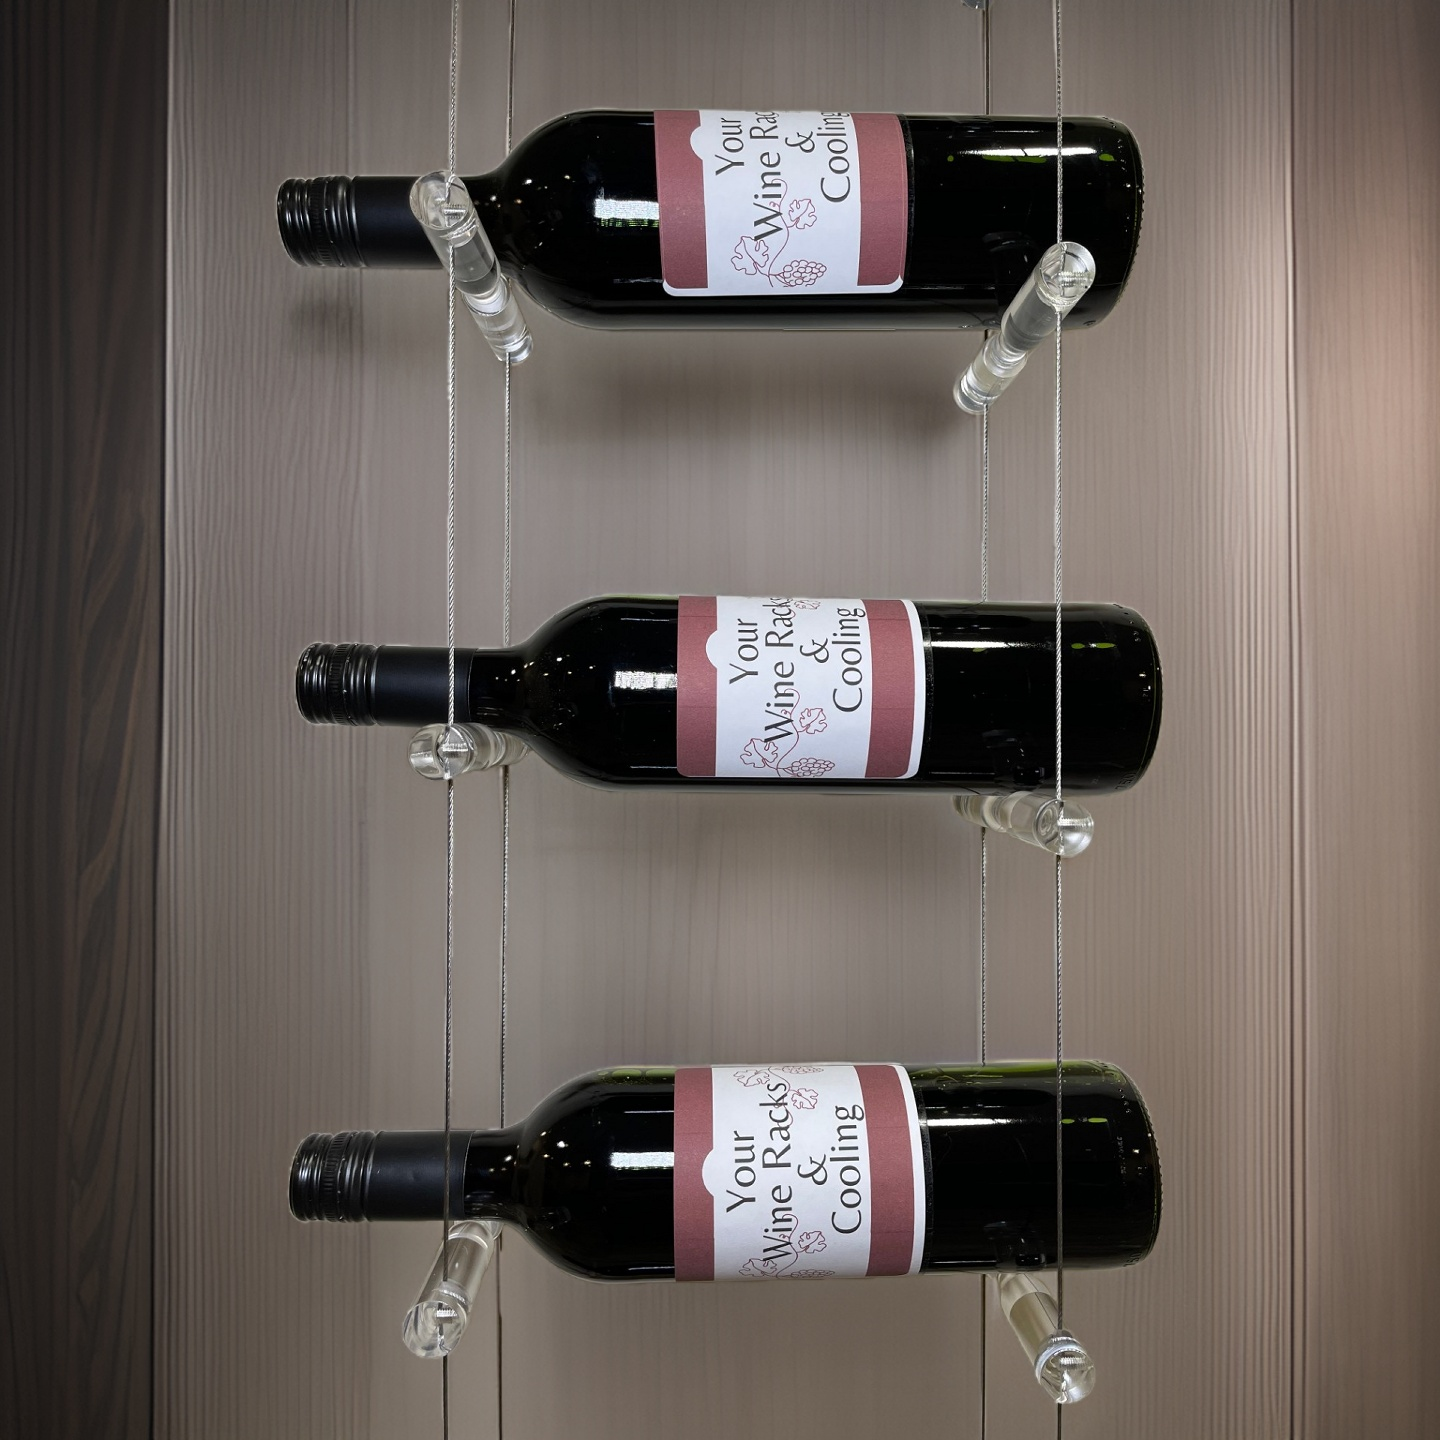 Invisible cable wine rack